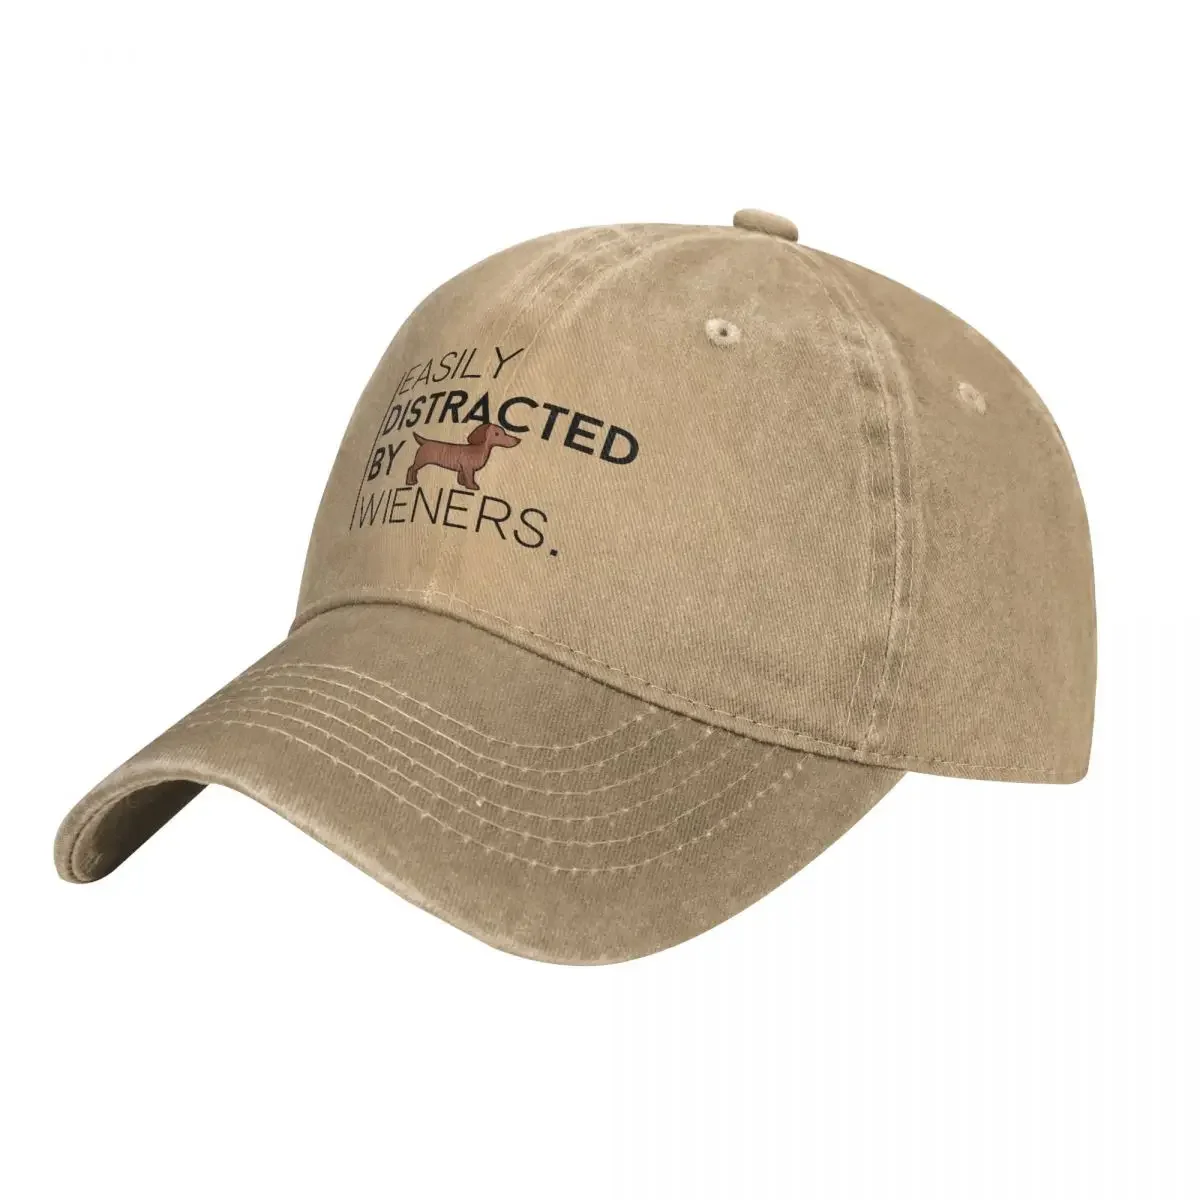 

easily distracted by wieners Baseball Cap Rugby Hat Man Women'S